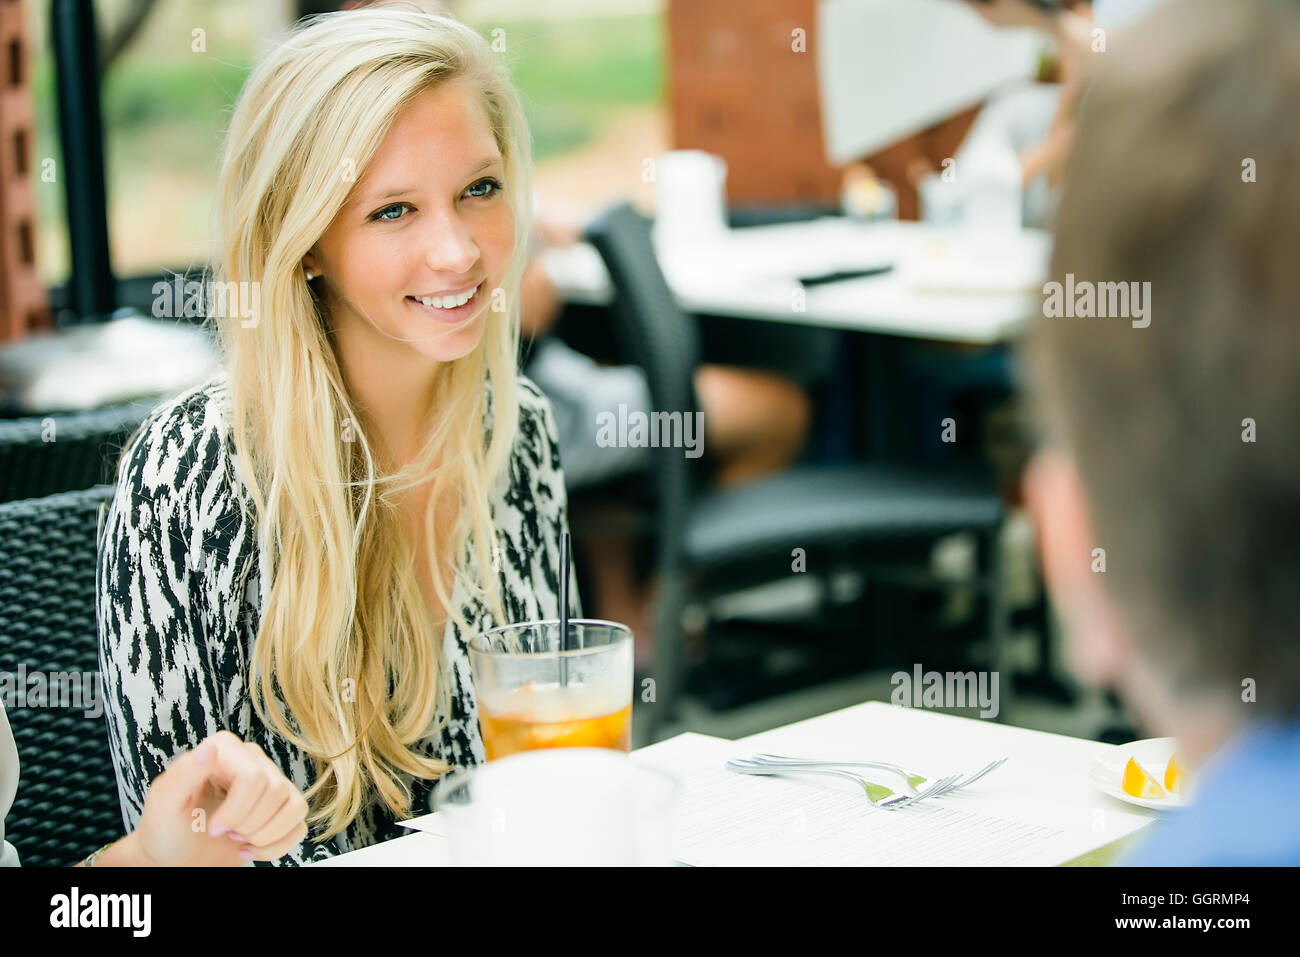 Smiling Caucasian woman sitting at table Banque D'Images